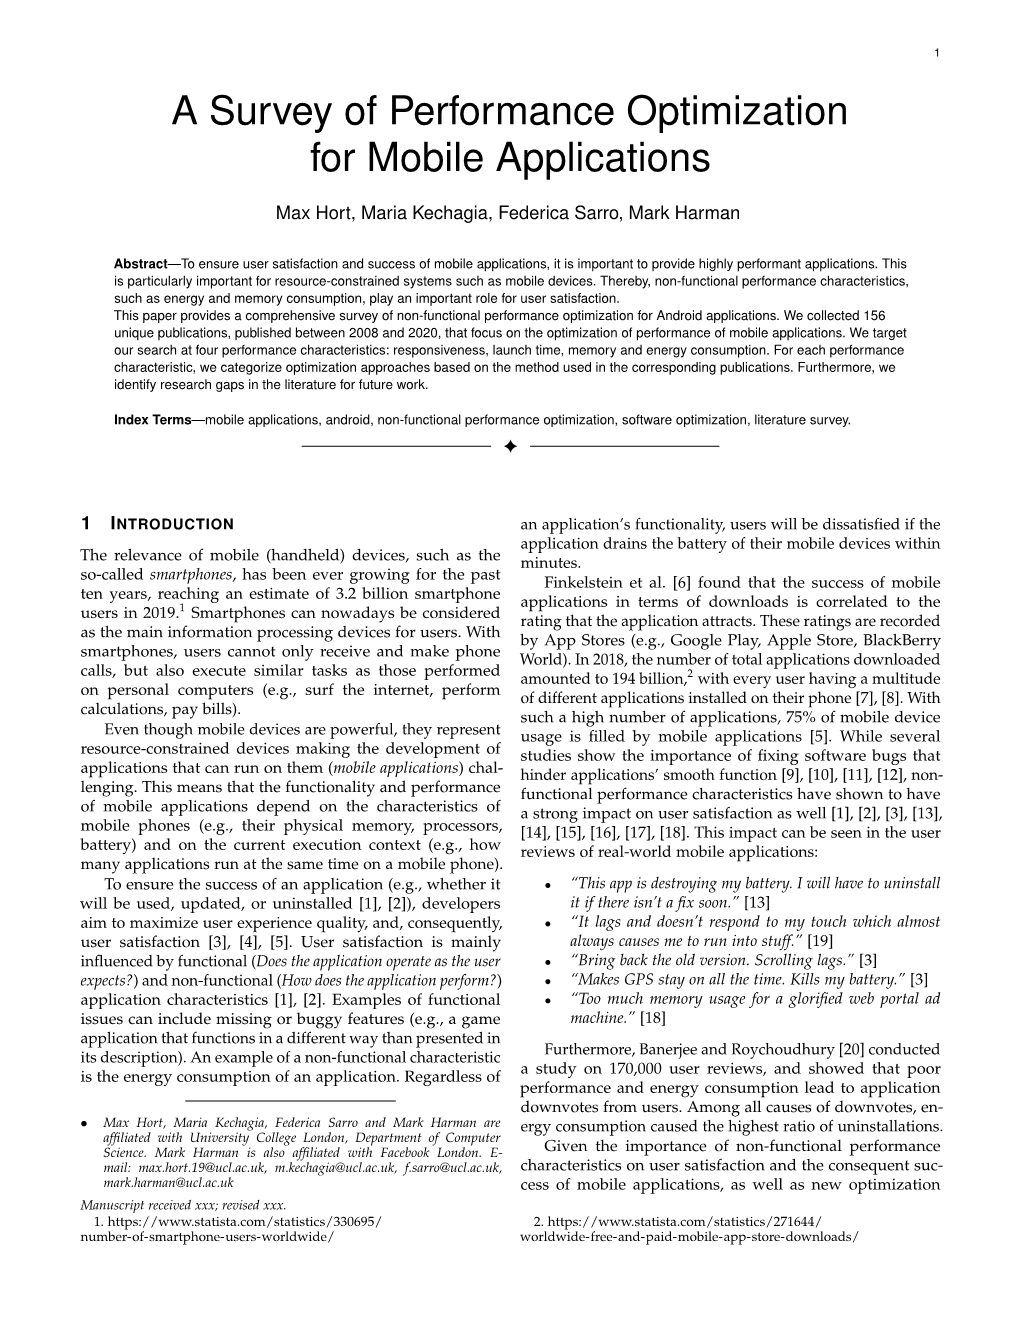 A Survey of Performance Optimization for Mobile Applications